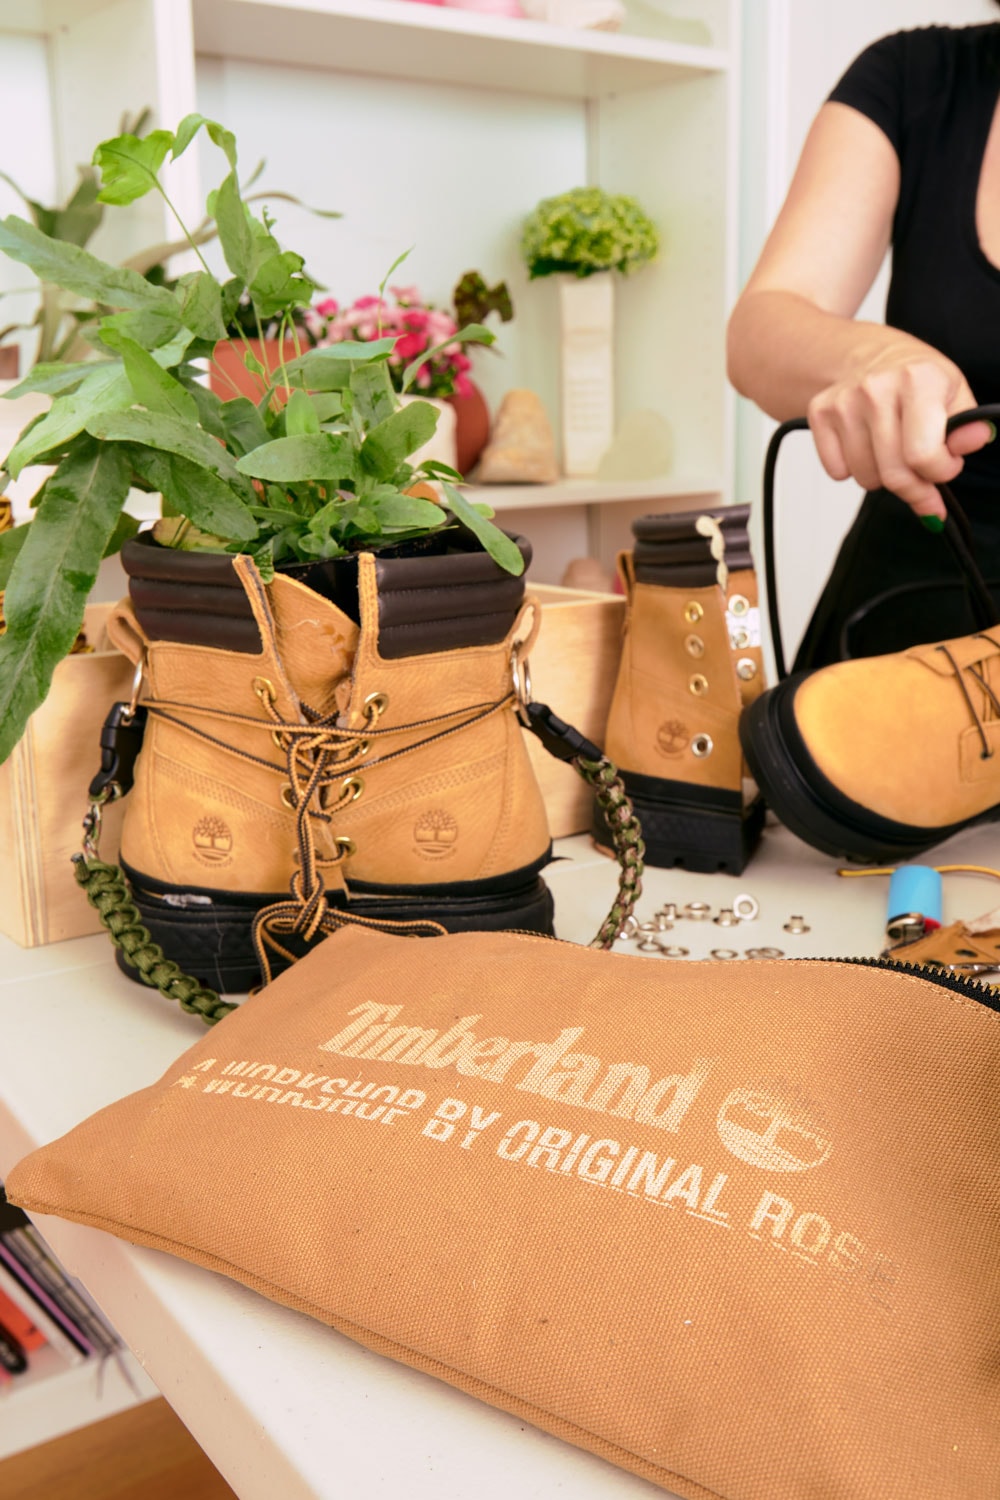 timberland olivia rose greenstride ray city waterproof boots nature inspired campaign planters plants potters